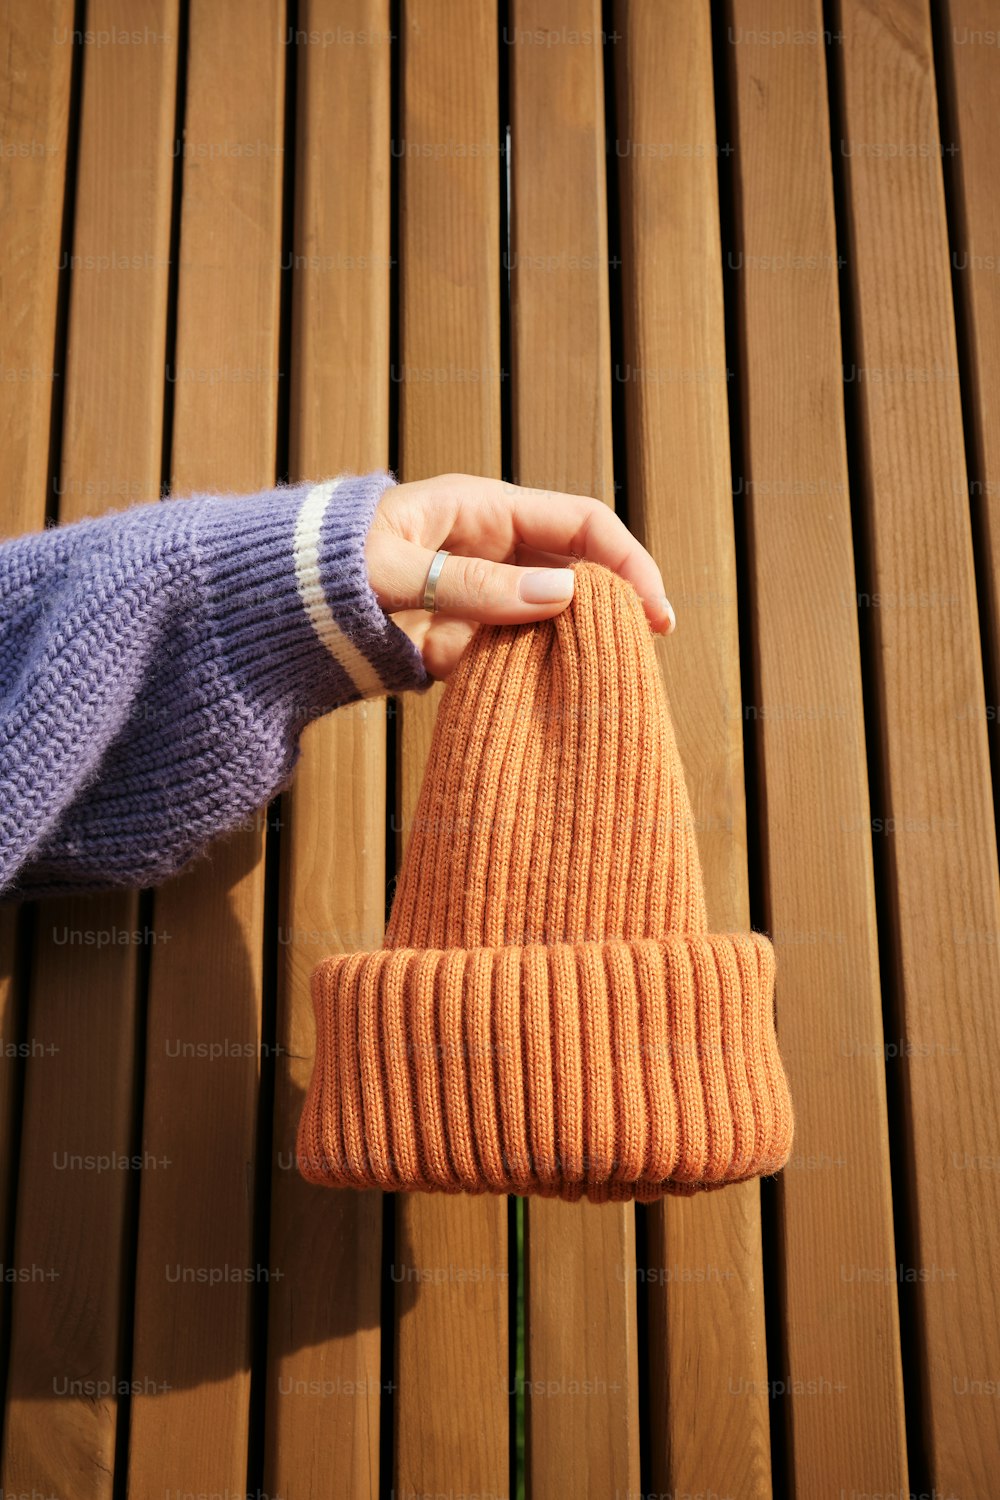 a person's hand holding a knitted orange hat